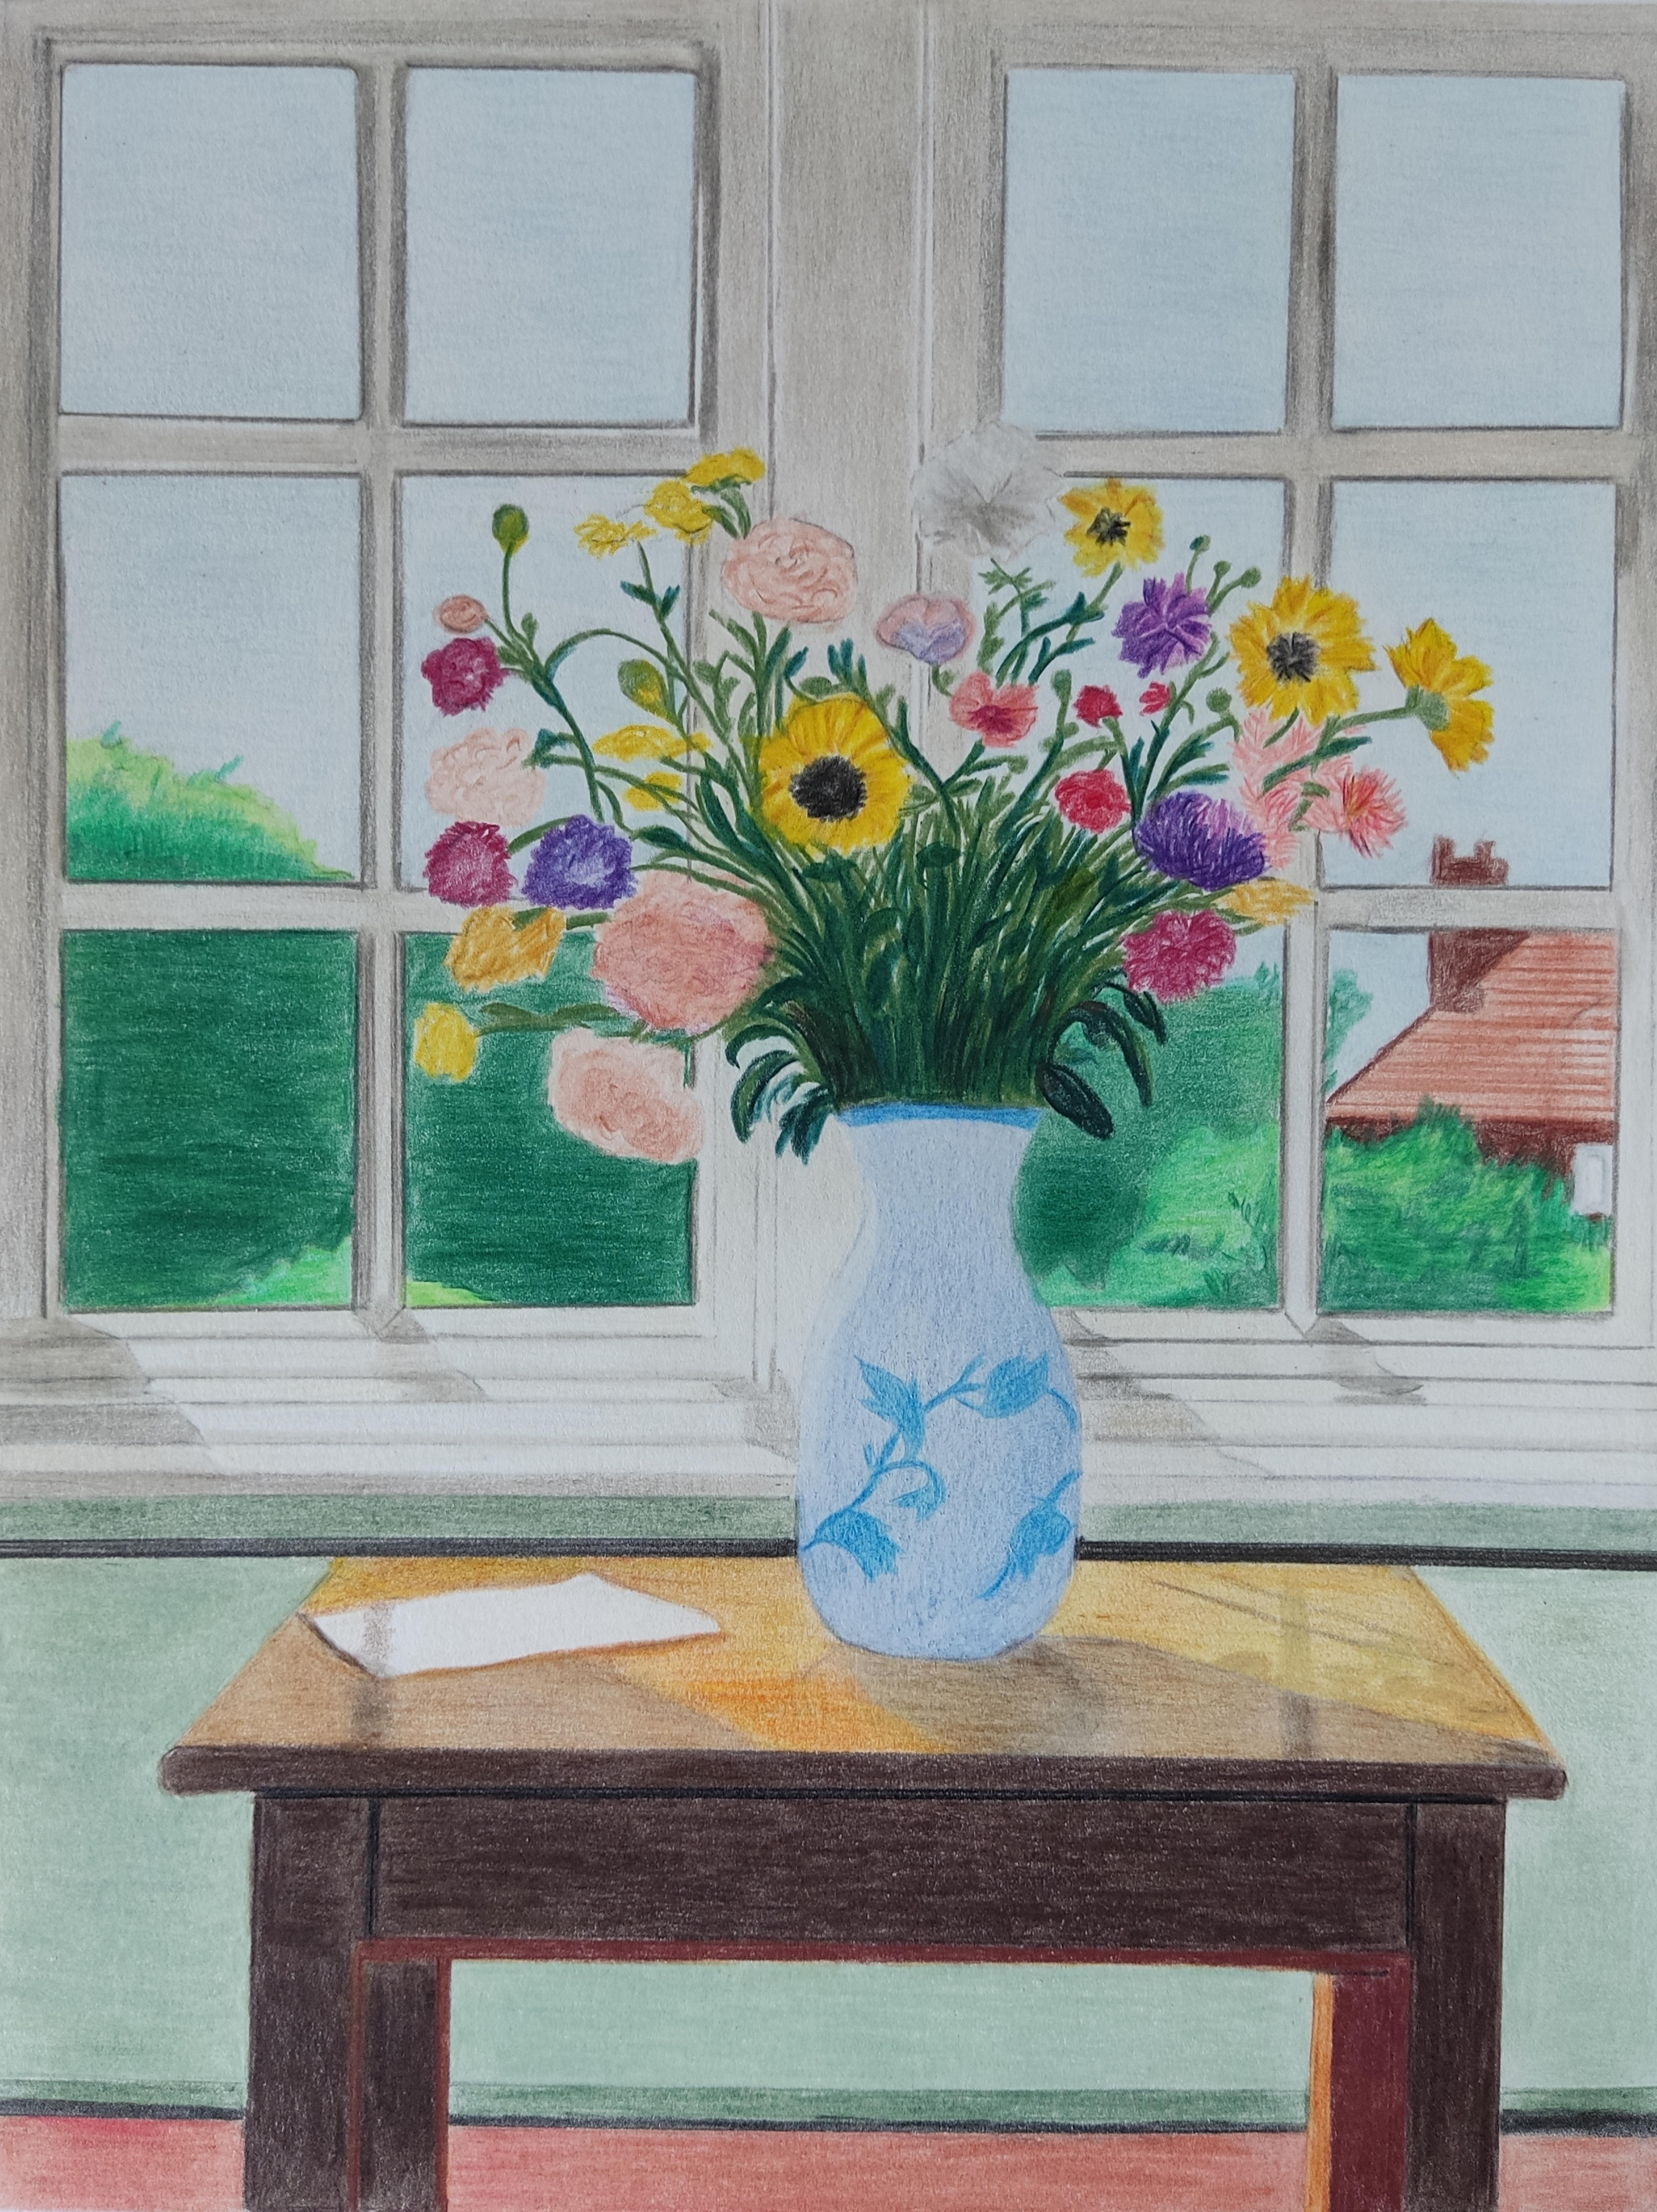 News From a Faraway Land, Original Drawing, Interior Scene, Vase, flowers